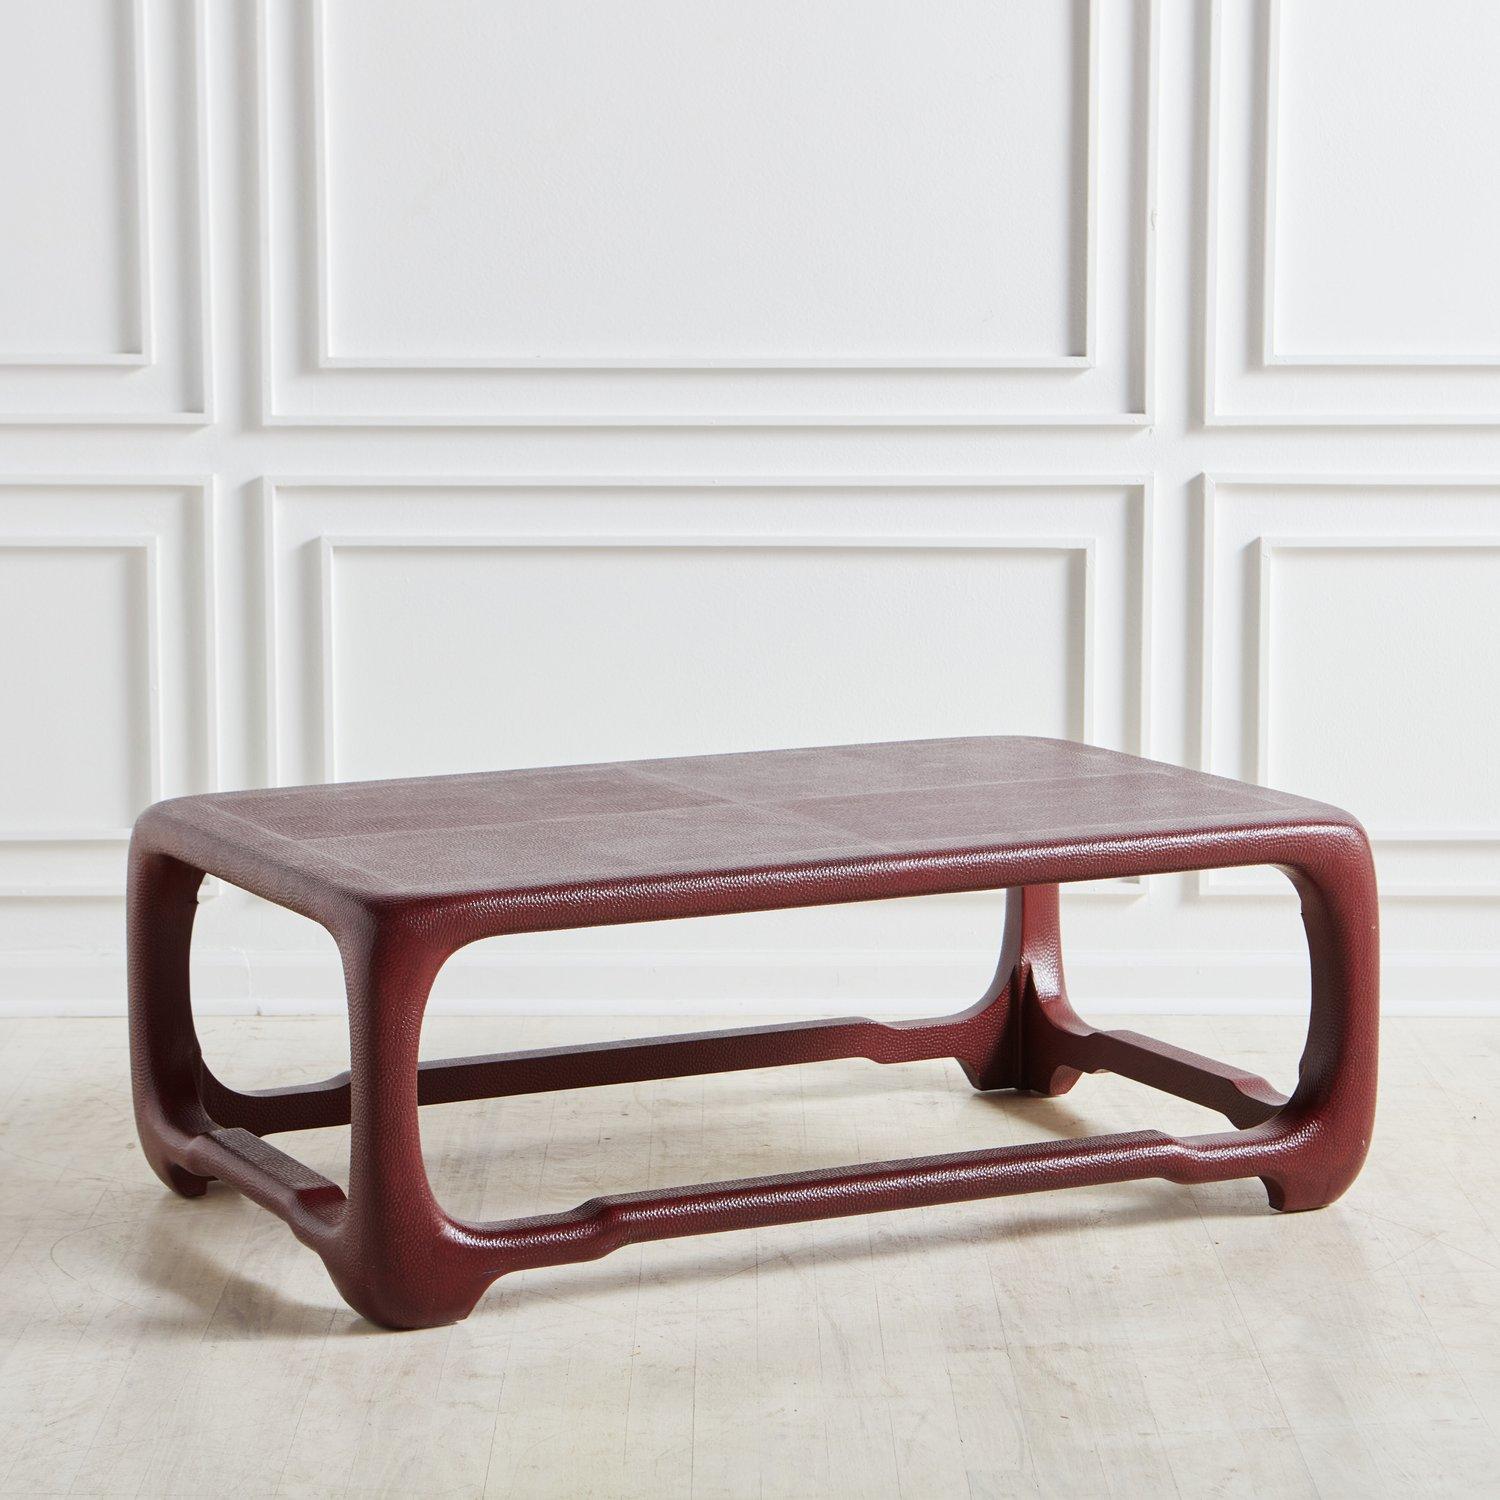 A rectangular embossed leather coffee table by Karl Springer. In a deep red with purple undertones, the embossed leather on this table features rich textural details. 

Karl Springer (1931-1991) was a prominent German-American designer known for